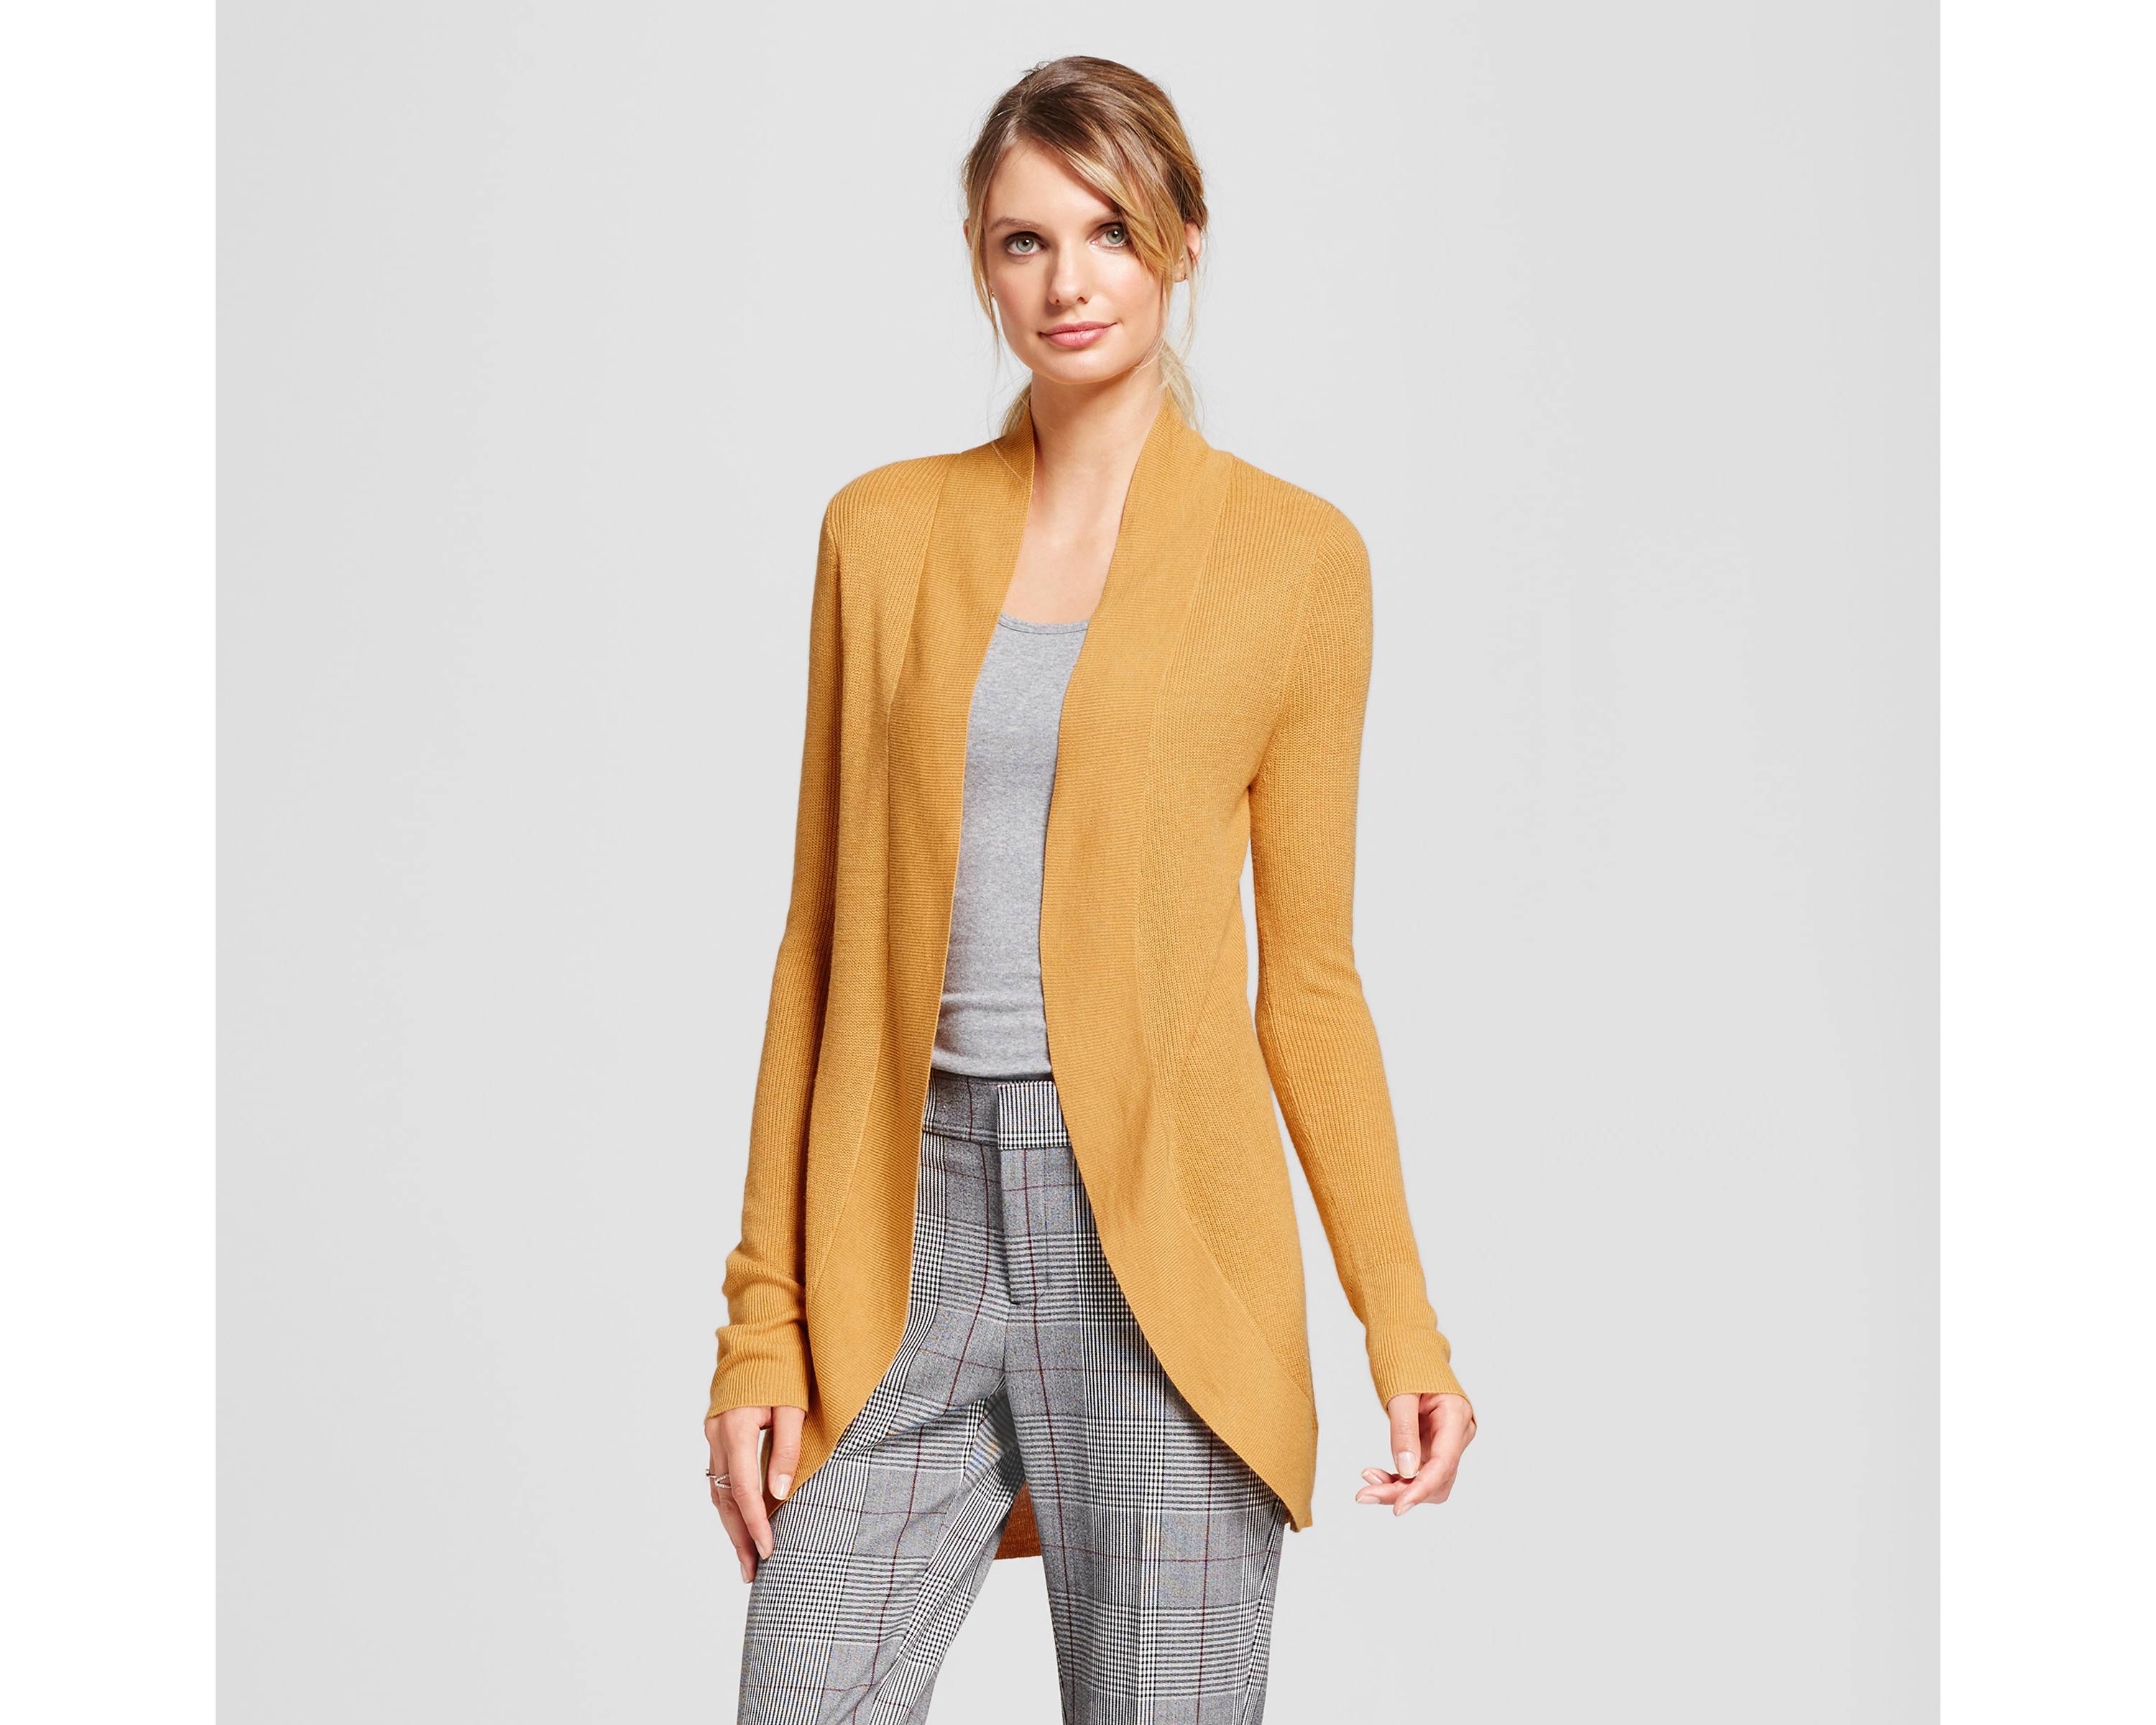 10 best cardigans for fall under $30